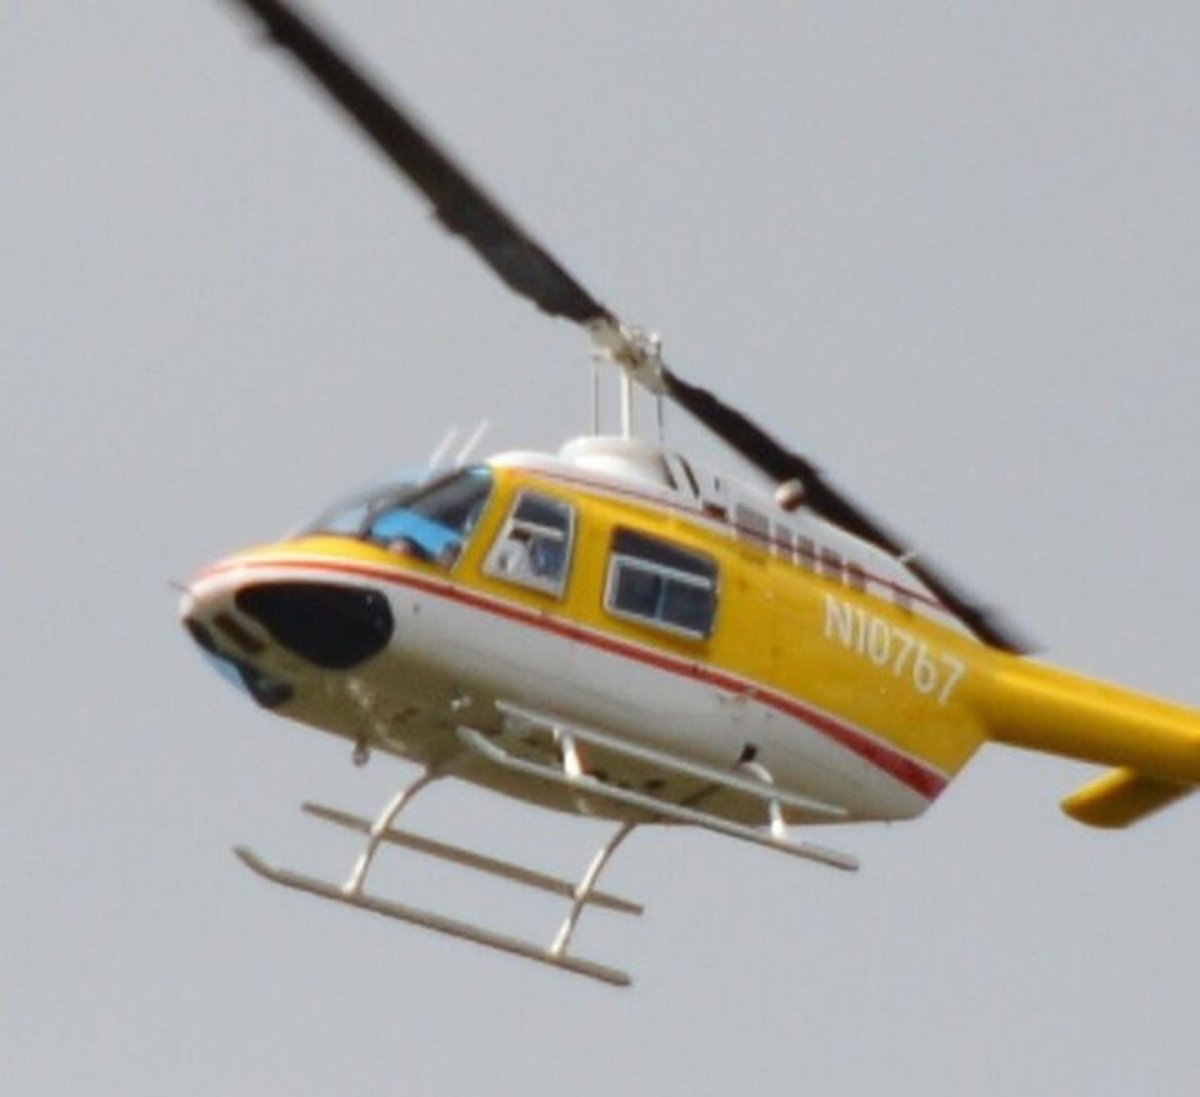 dapl helicopters